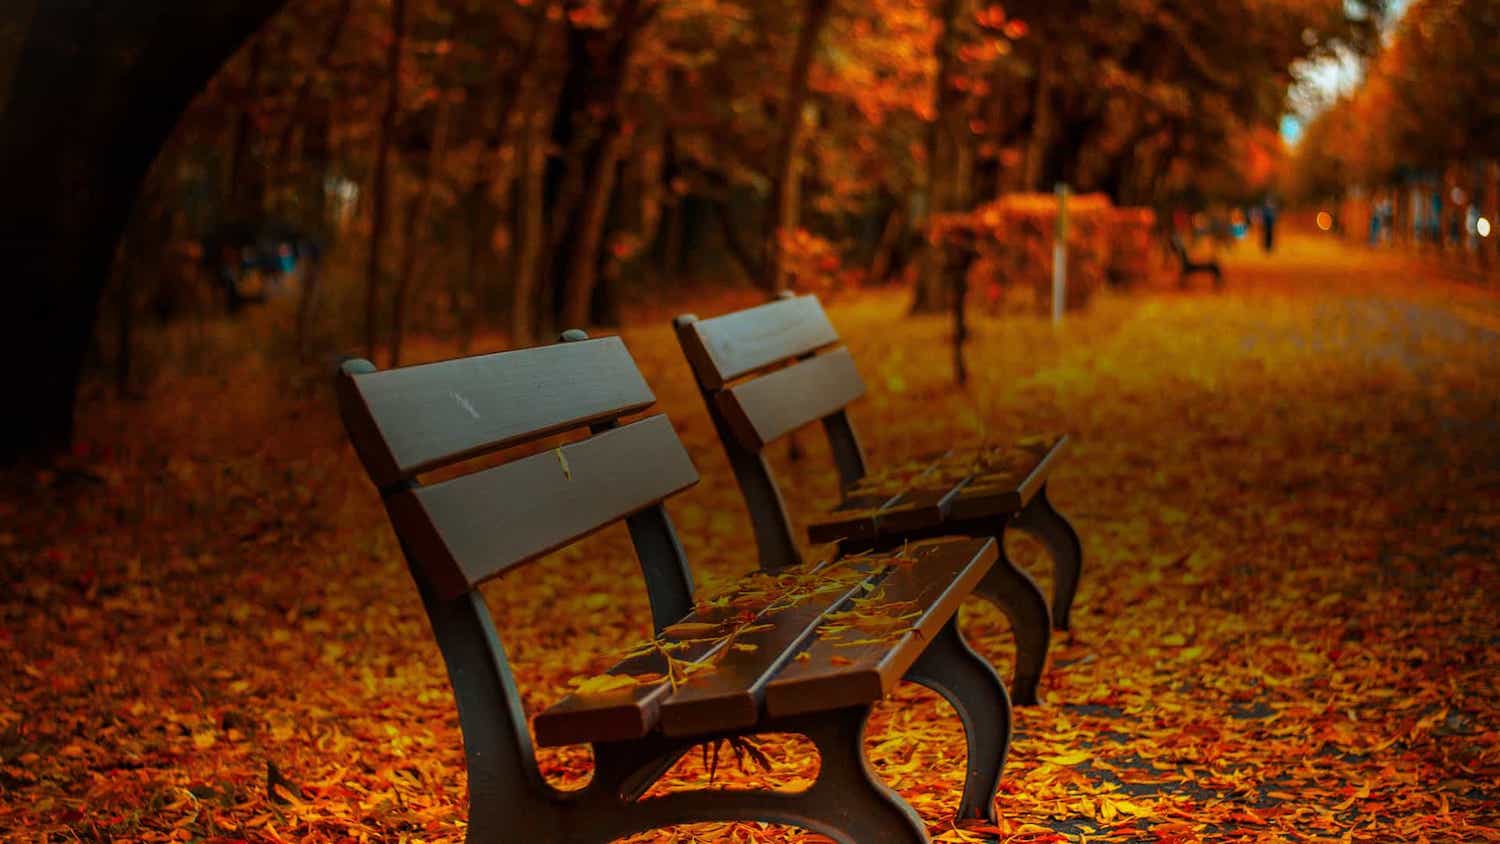 Two benches surrounded by fall leaves and trees